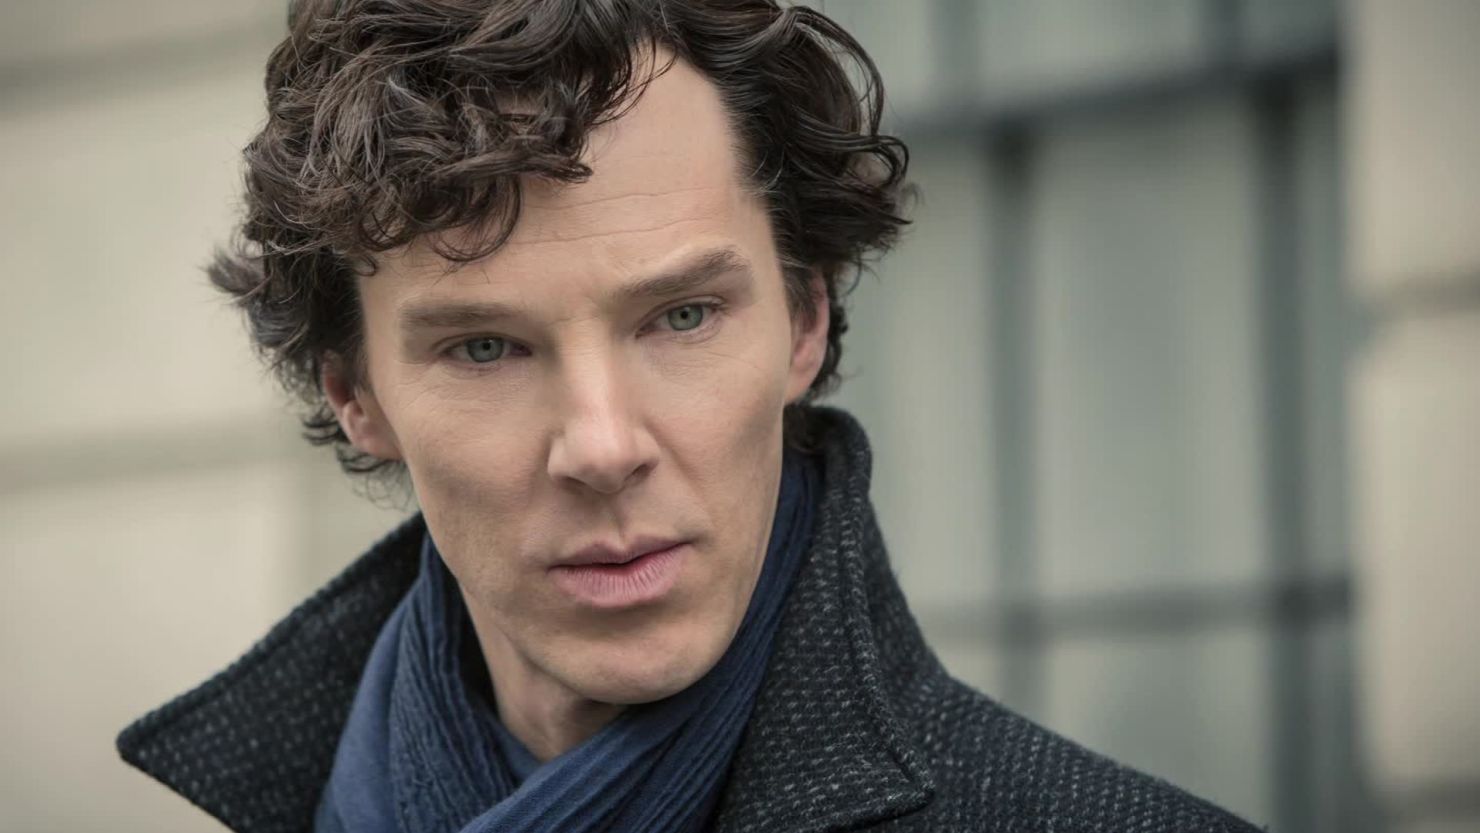 British actor Benedict Cumberbatch recorded an introduction to the Crowded House song "Help Is Coming."